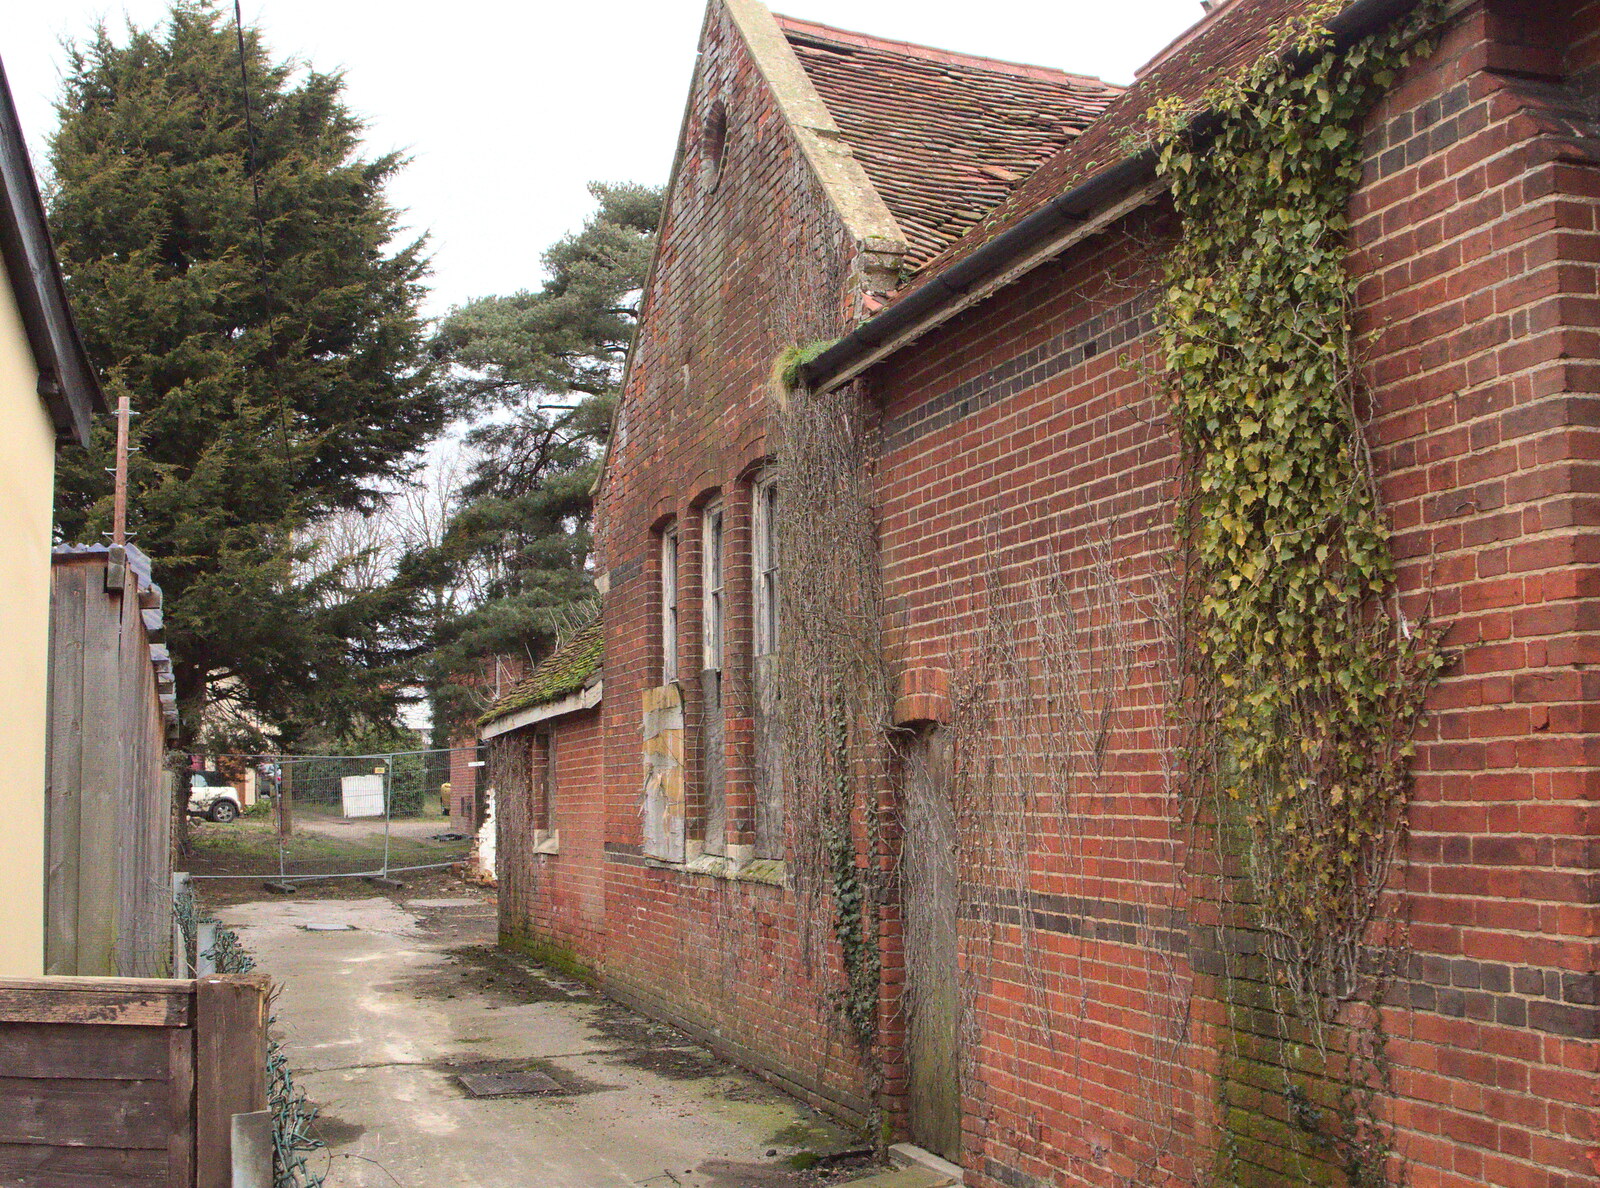 The old infants school from Closing Down: A Late January Miscellany, Diss, Norfolk - 31st January 2015